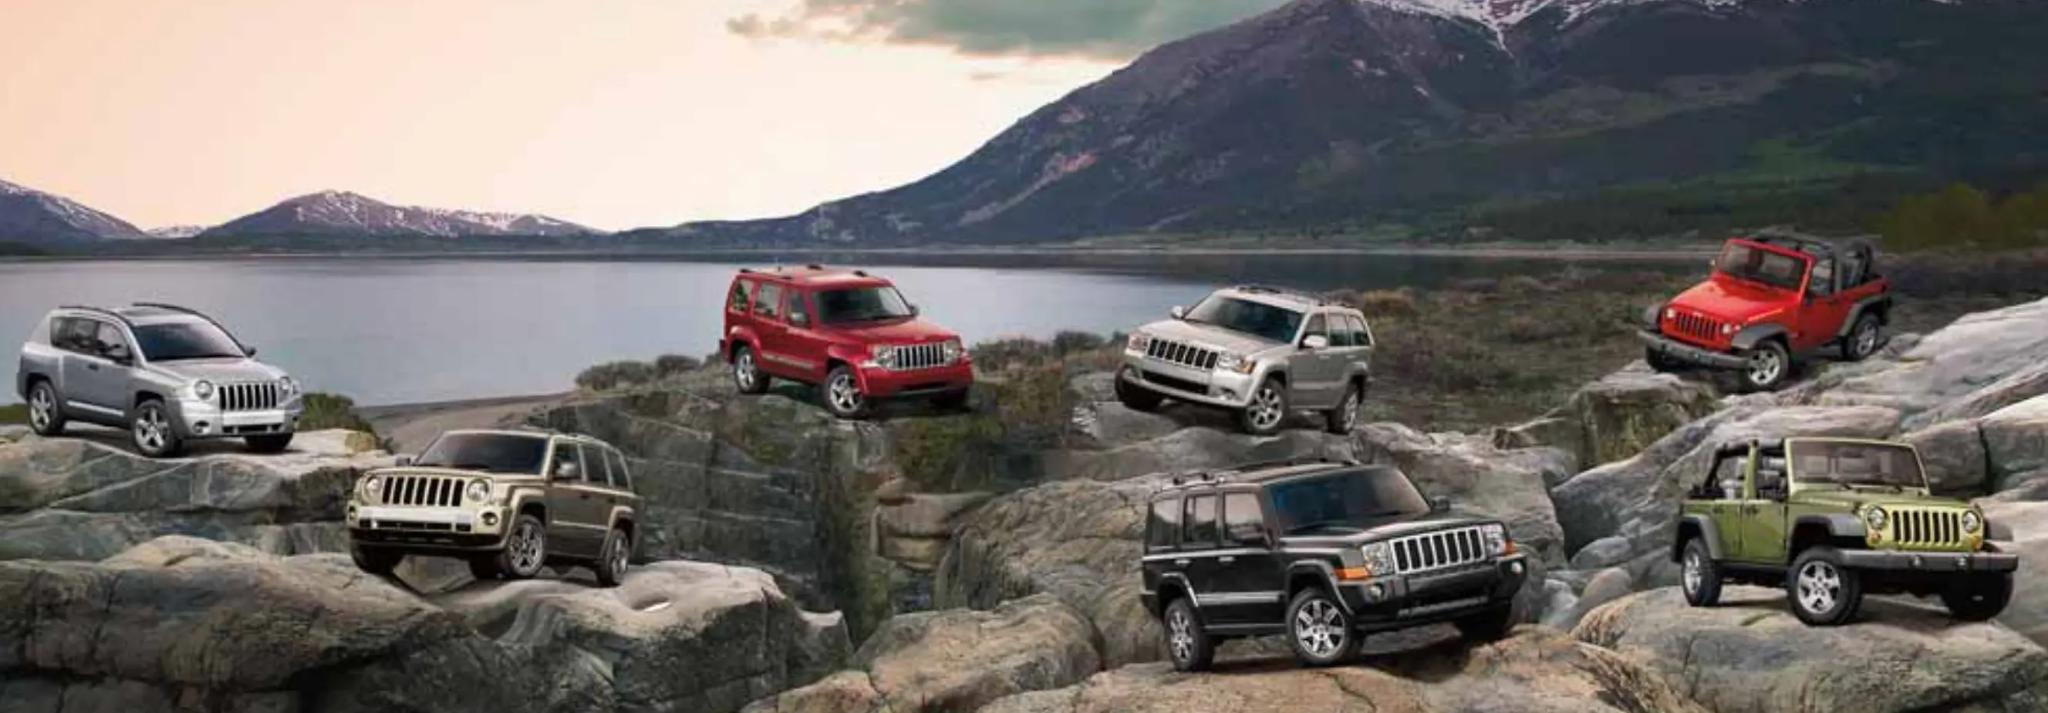 all 2008 jeep vehicles in 1 photo